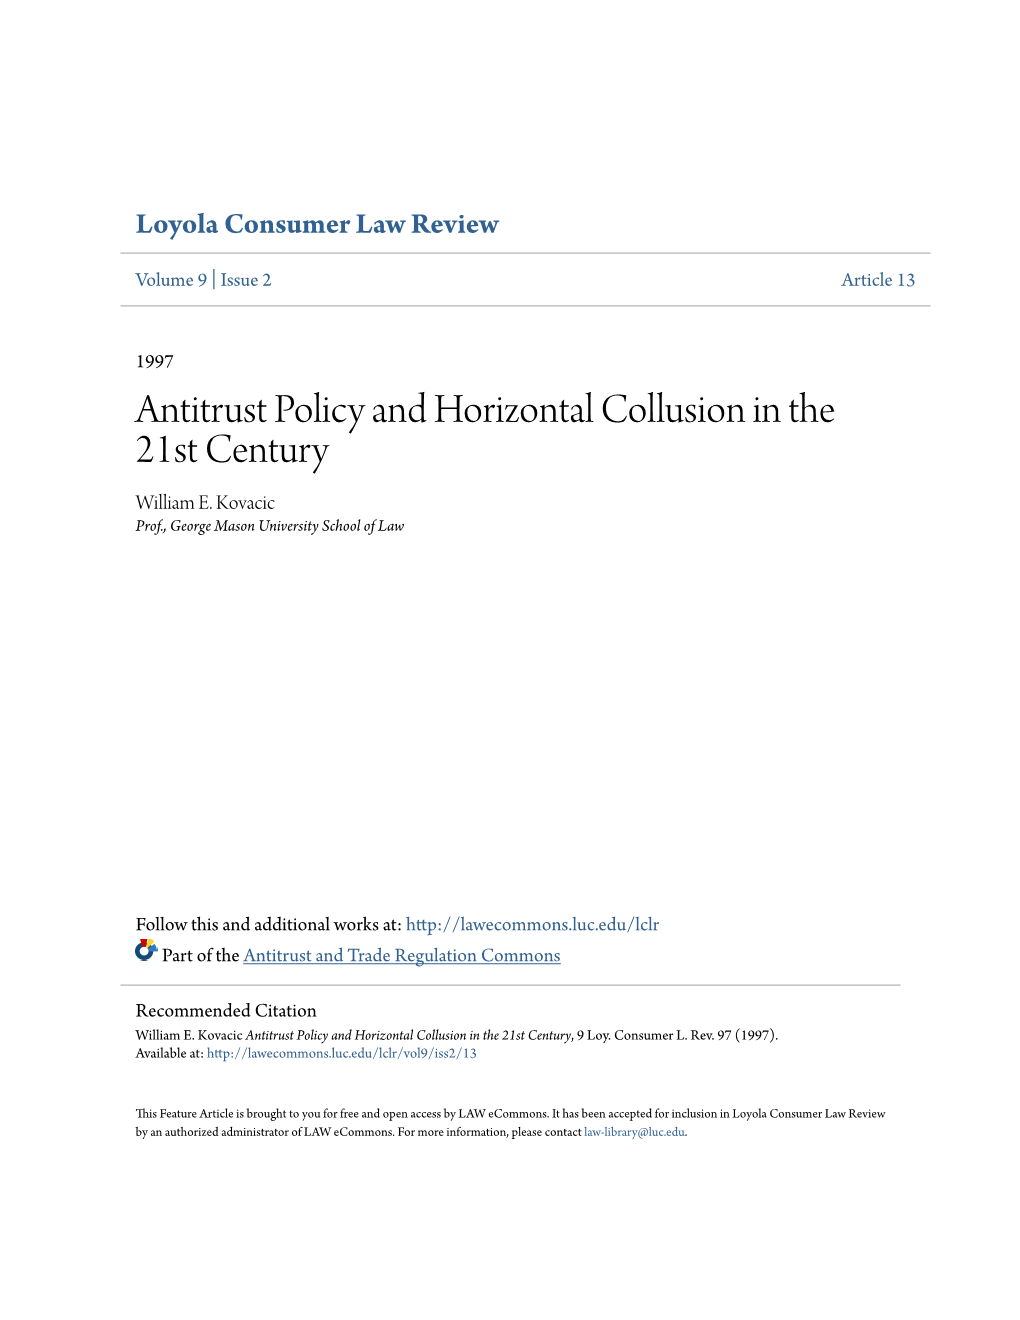 Antitrust Policy and Horizontal Collusion in the 21St Century William E